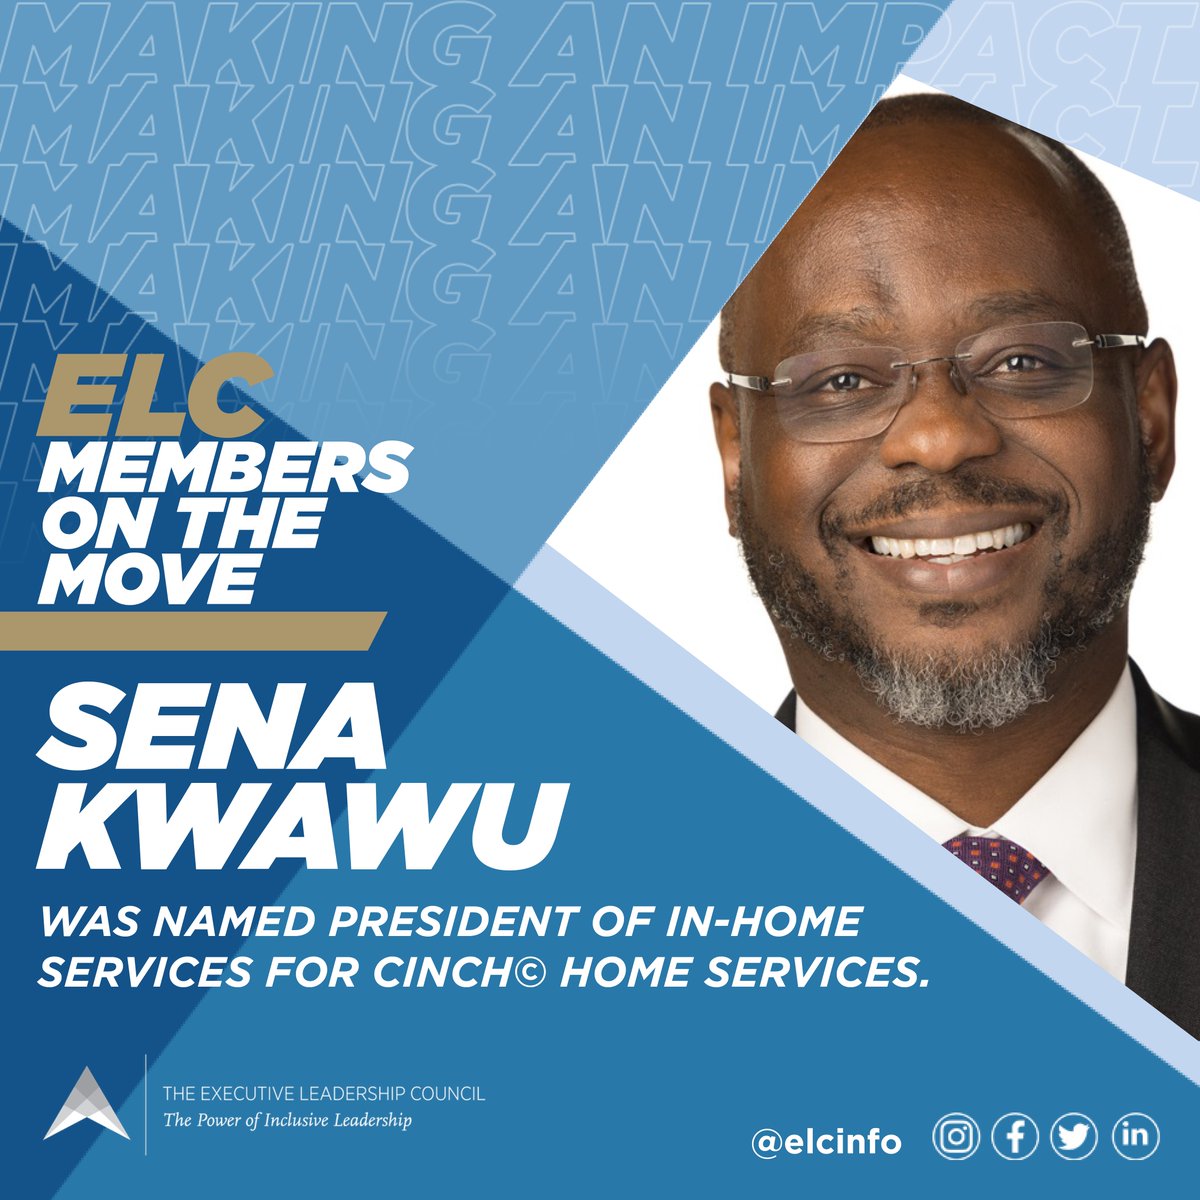 Congratulations to #ELCMember Sena Kwawu, who was named President of In-Home Services for @CinchHome Services. #ELCMembersOnTheMove #BlackMenLead #BlackExecutives #BlackLeadership